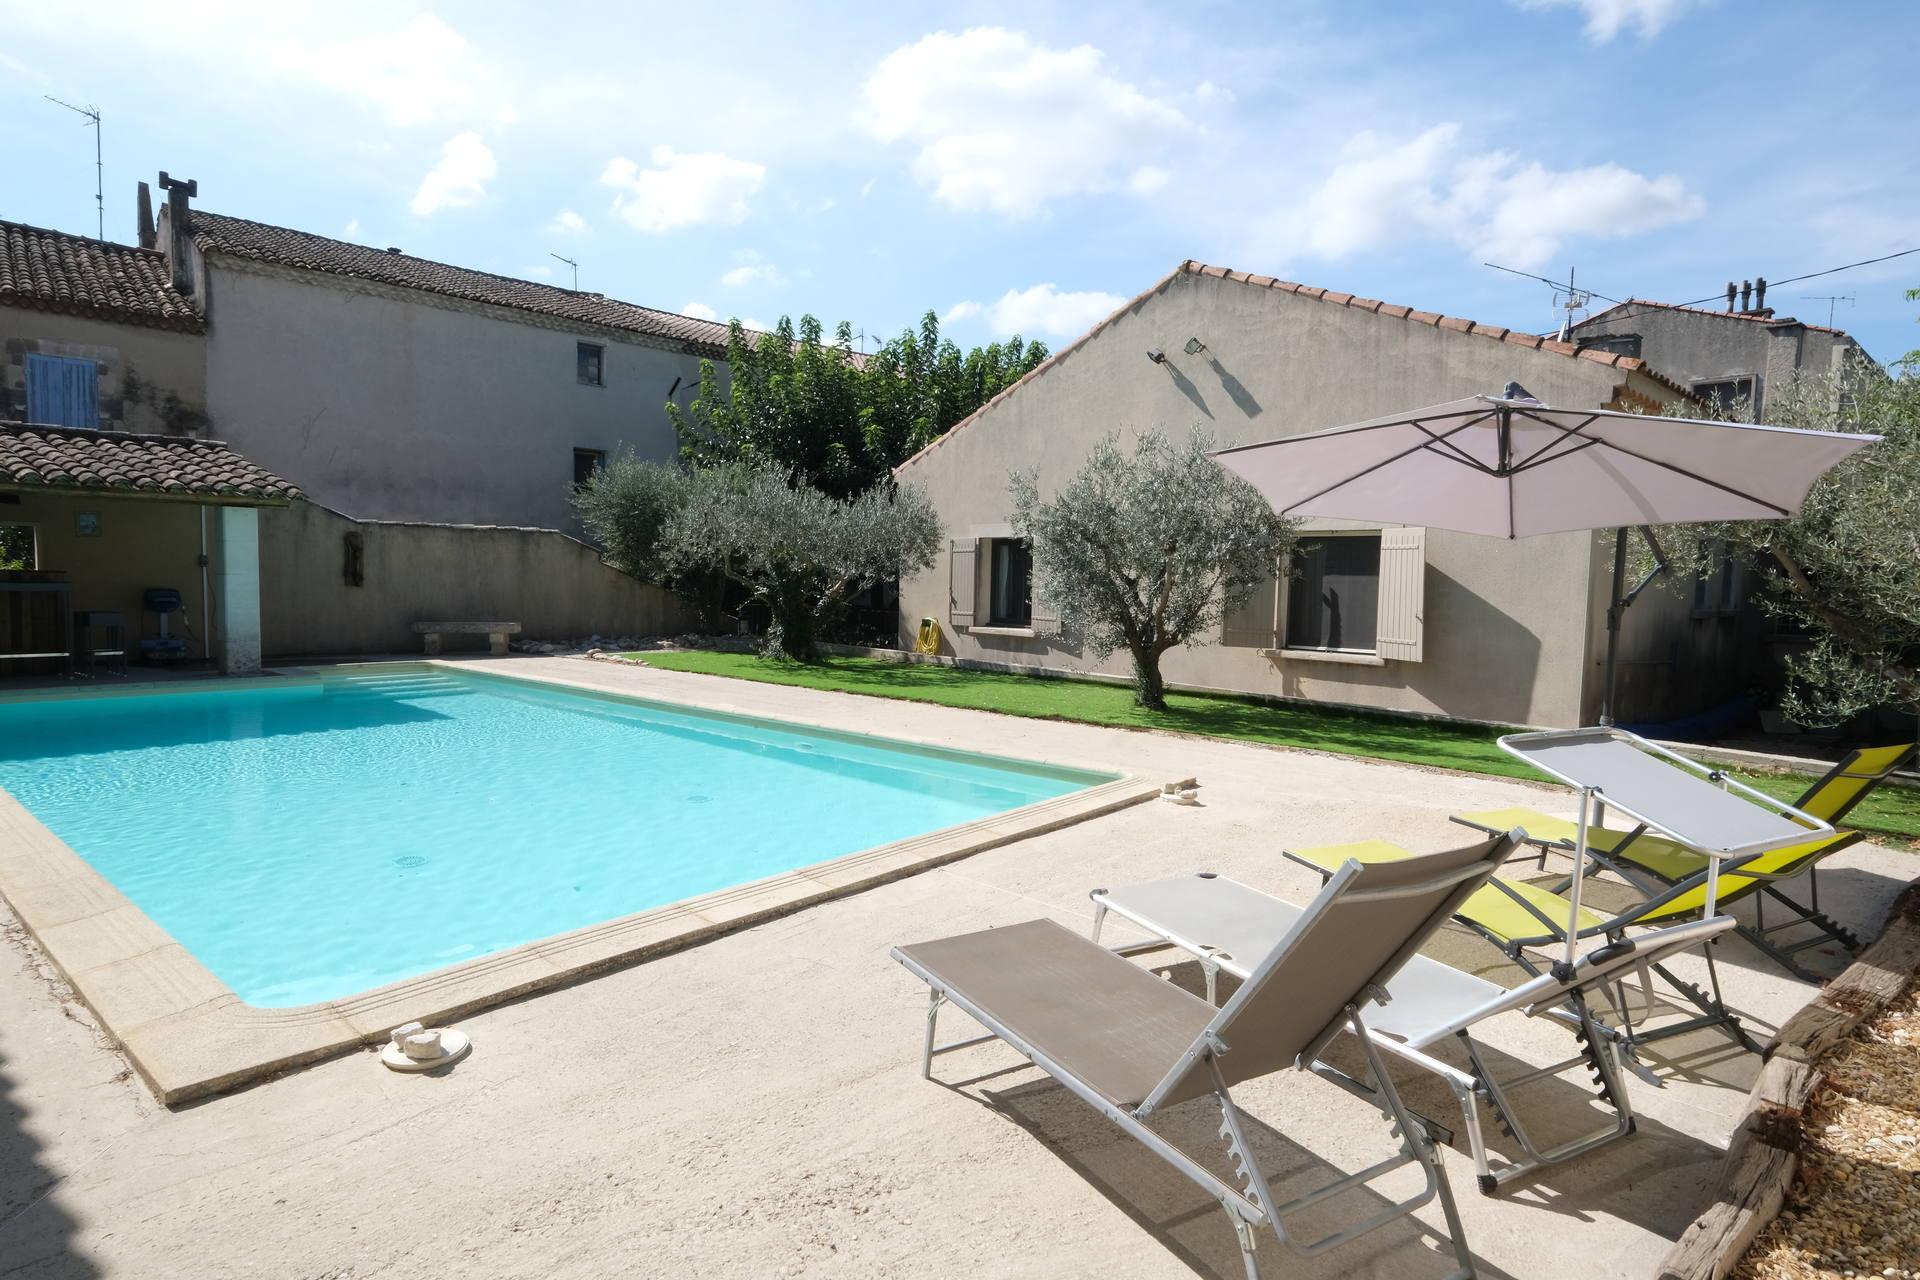 Property Image 2 - Pleasant villa with swimming pool in Maillane, between Avignon and Saint-Rémy-de-Provence - 6 people